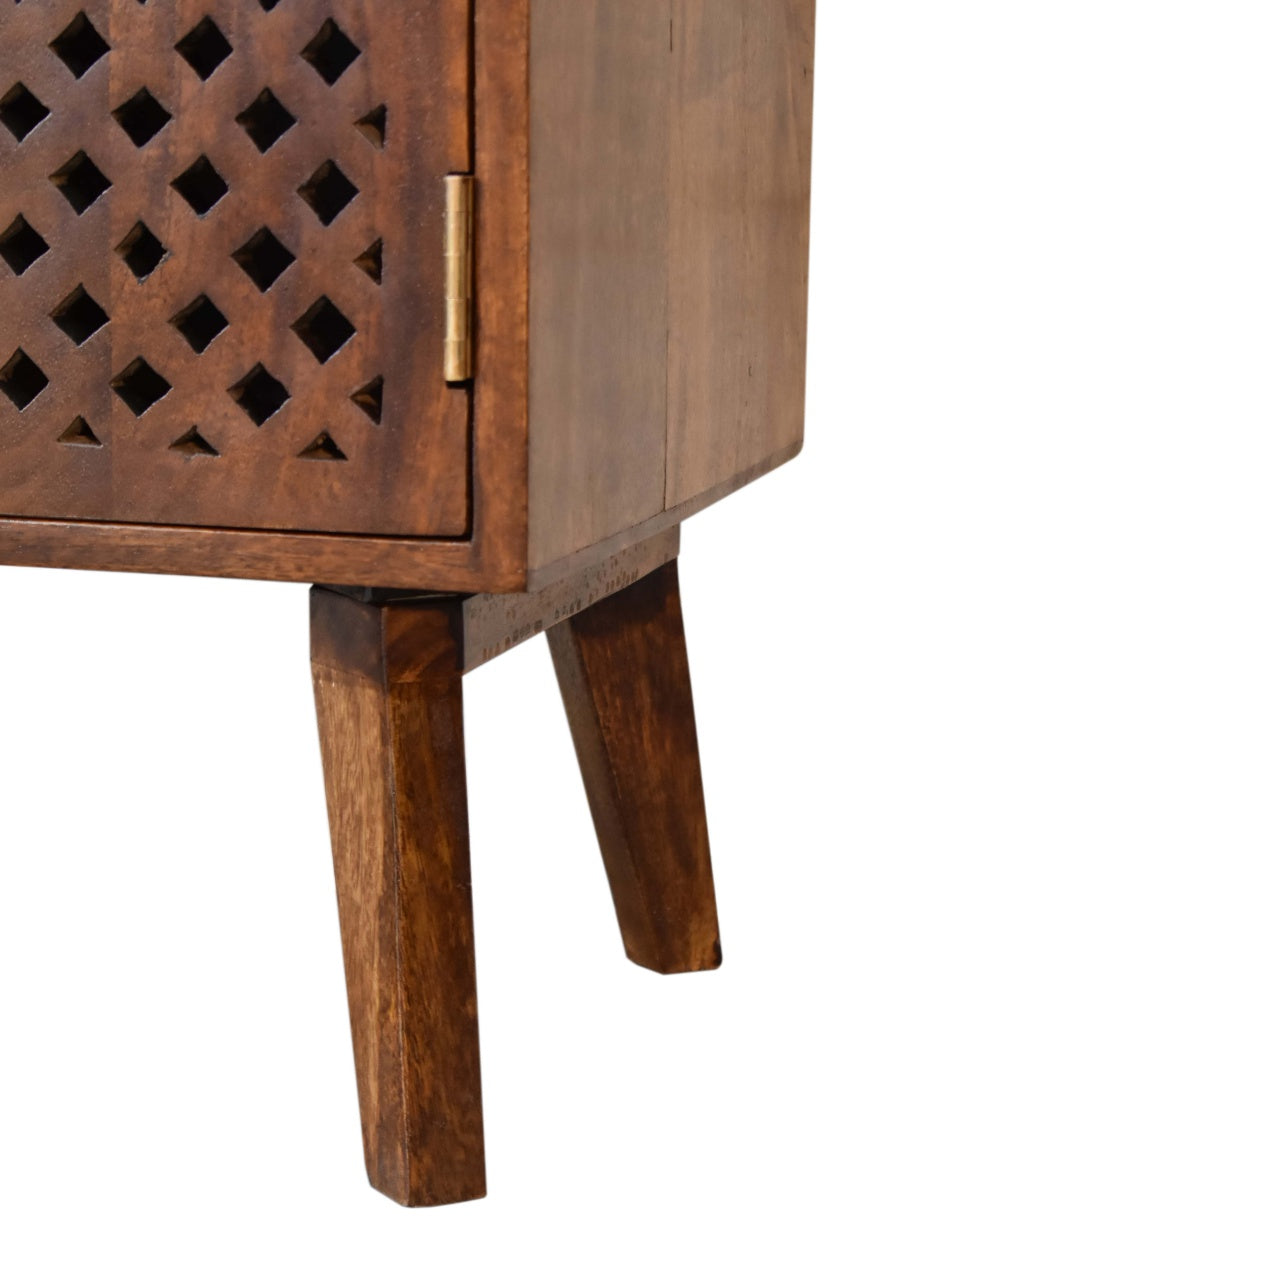 Diamond Cut Solid Wood Bedside Table In Chestnut Finish